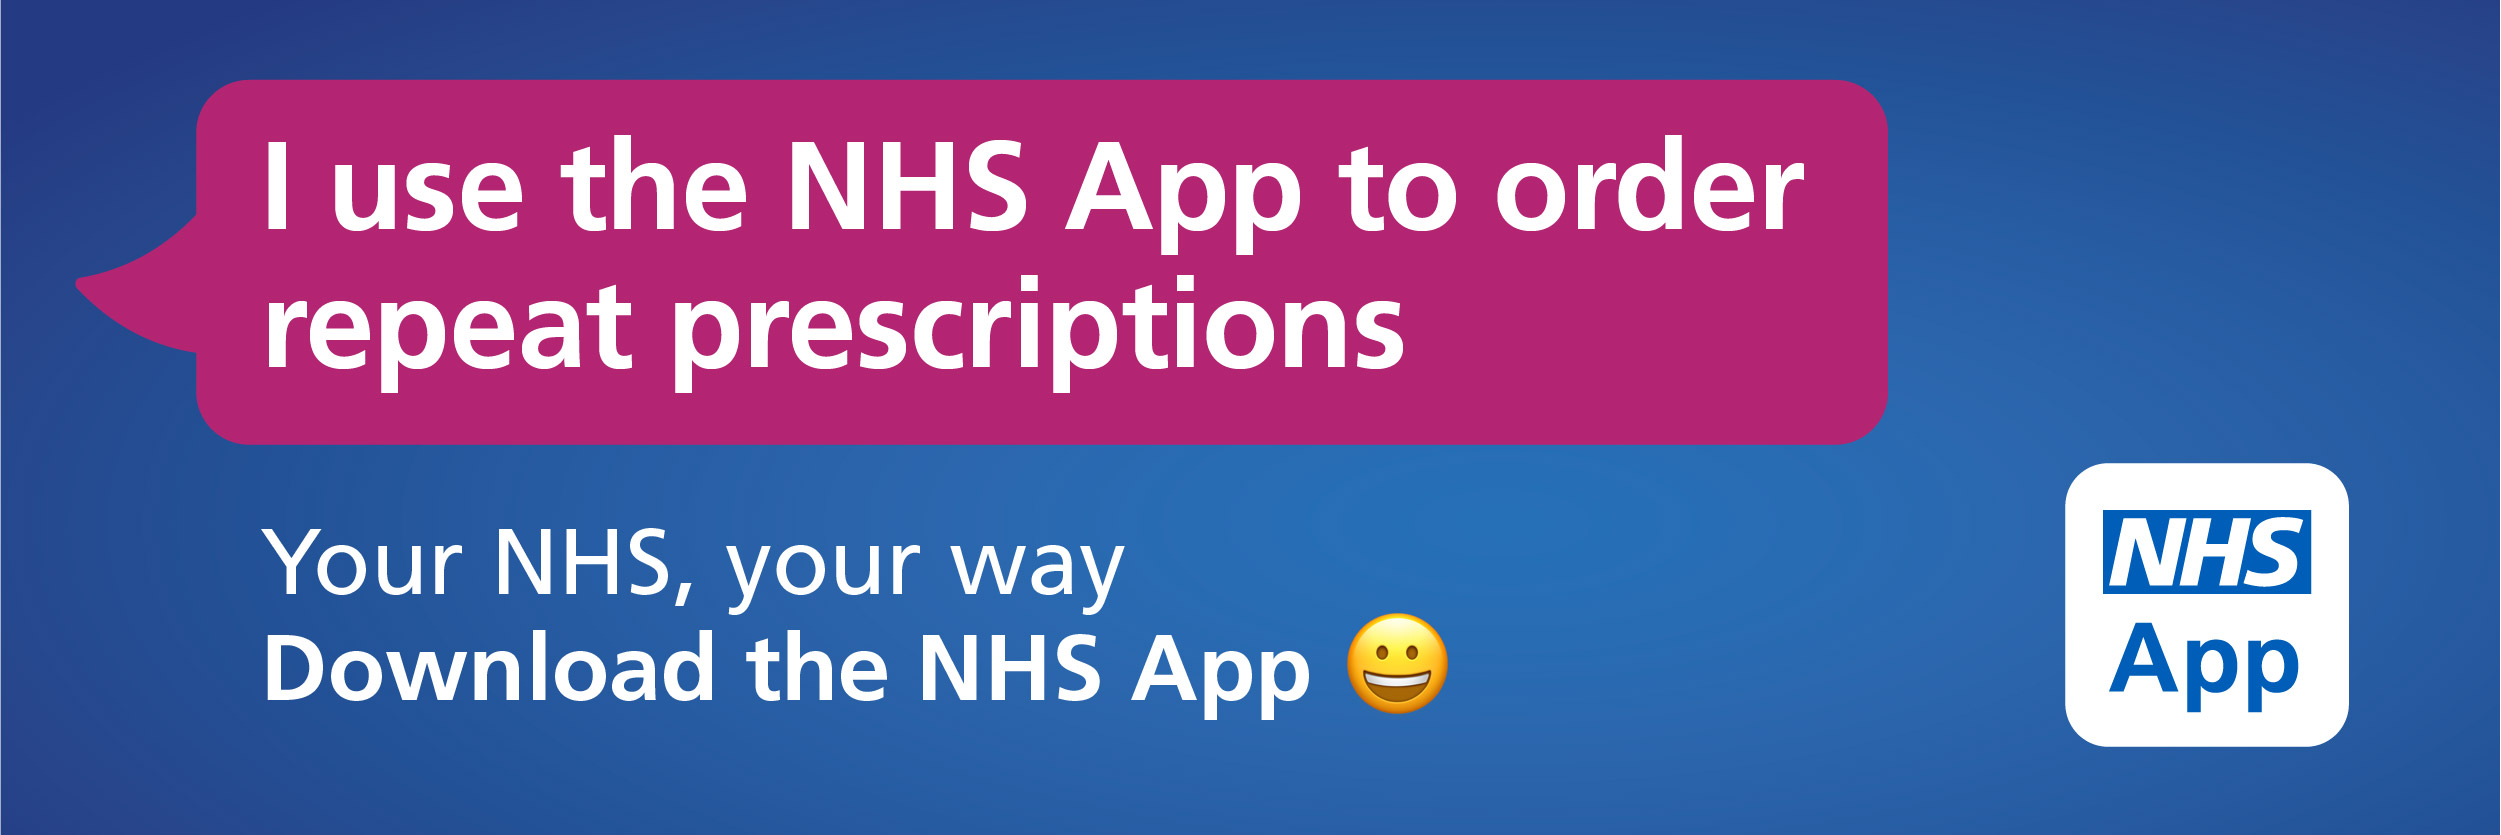 "I use the NHS app to order repeat prescriptions". Your NHS, your way. Download the NHS app